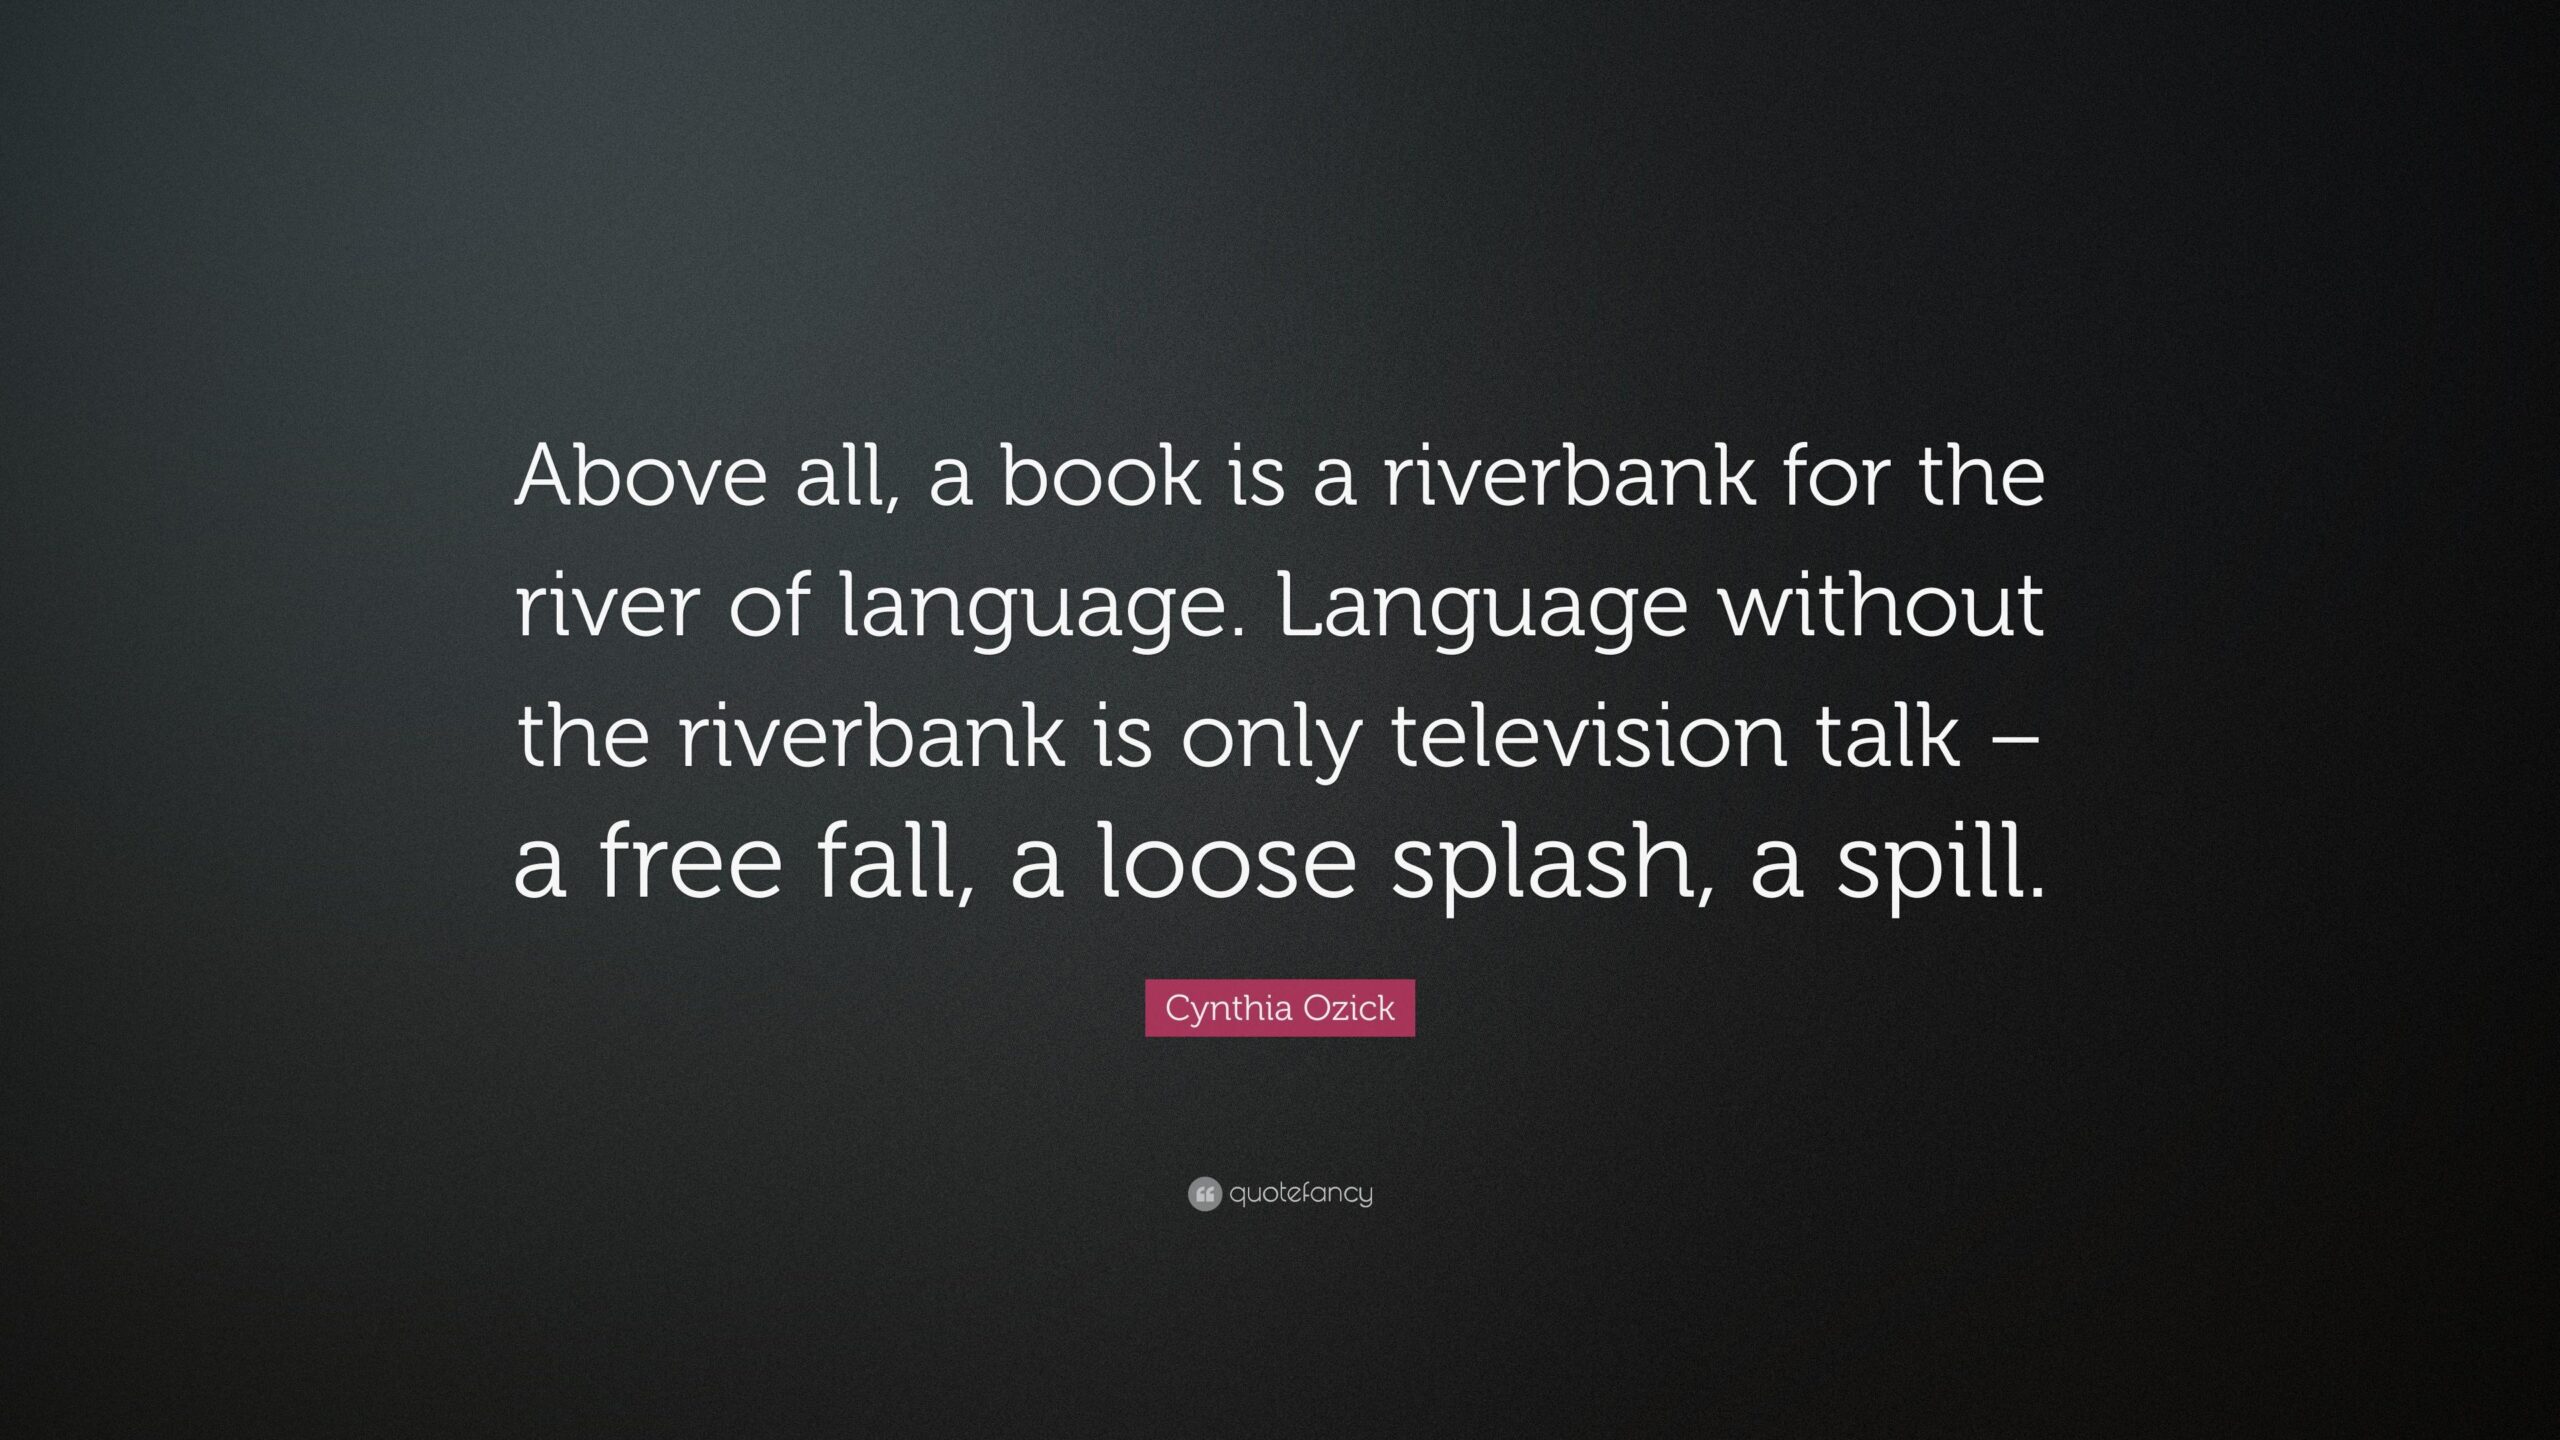 Cynthia Ozick Quote “Above all, a book is a riverbank for the river